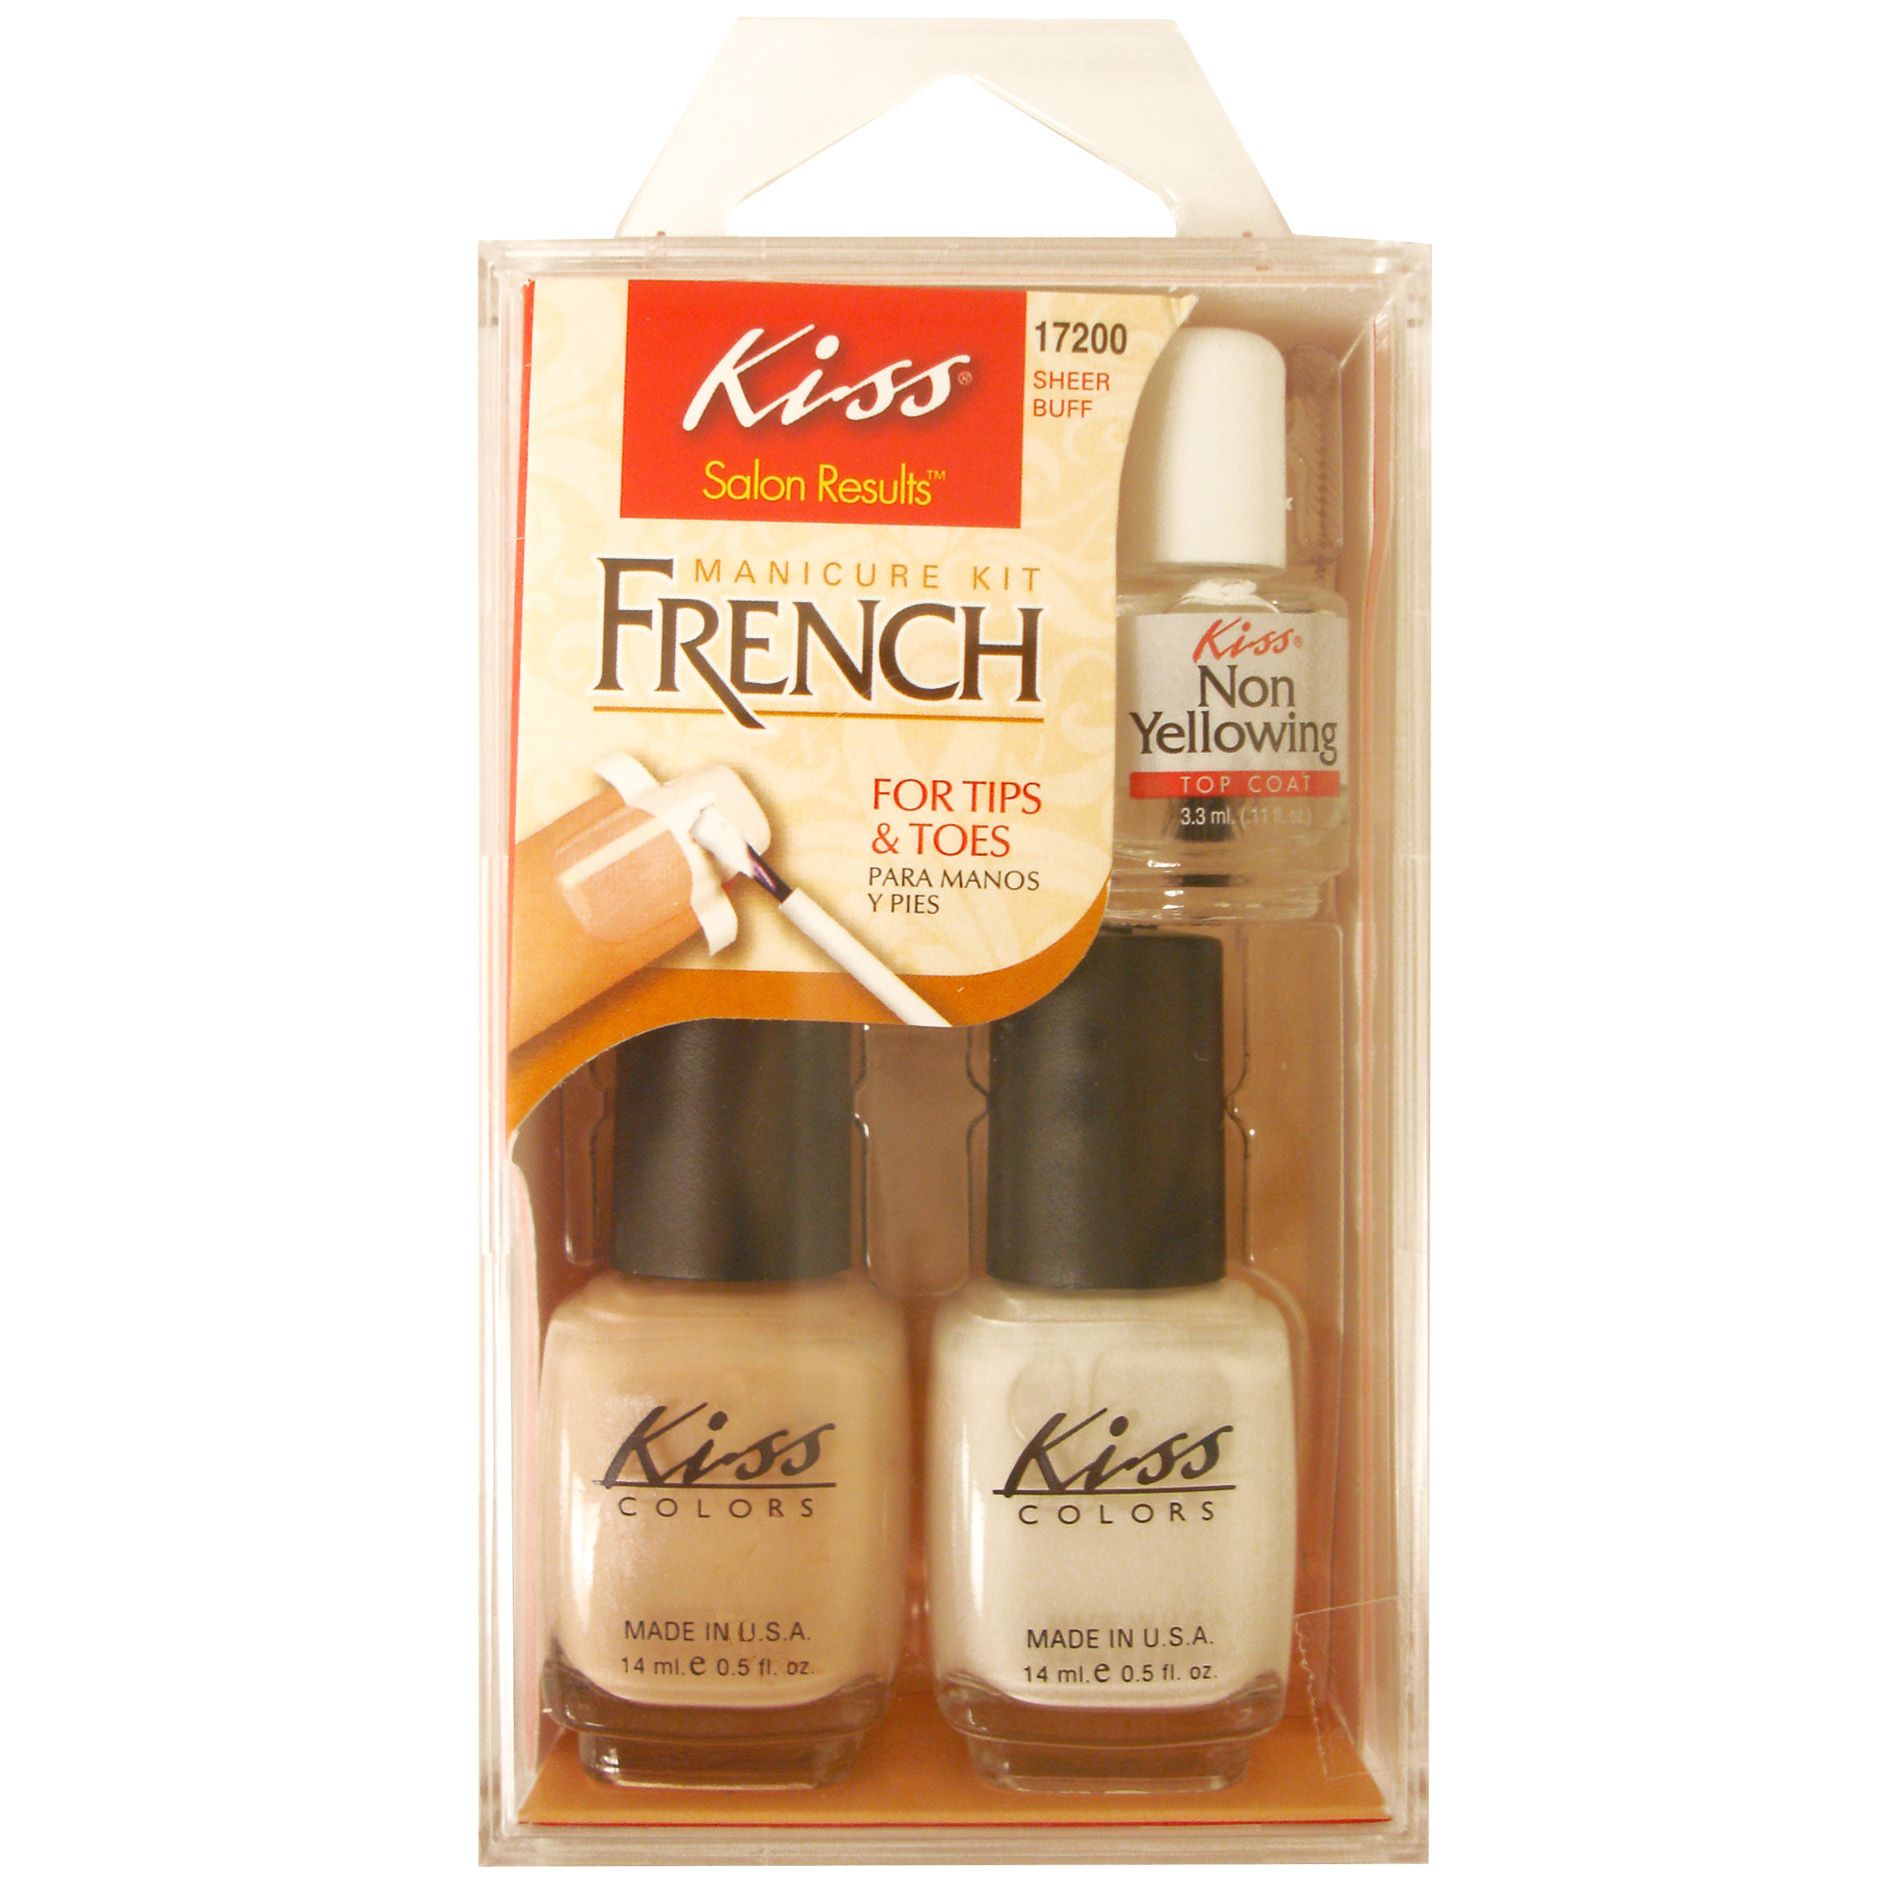 Kiss French Manicure Kit for Tips & Toes, Sheer Pink, 1 kit